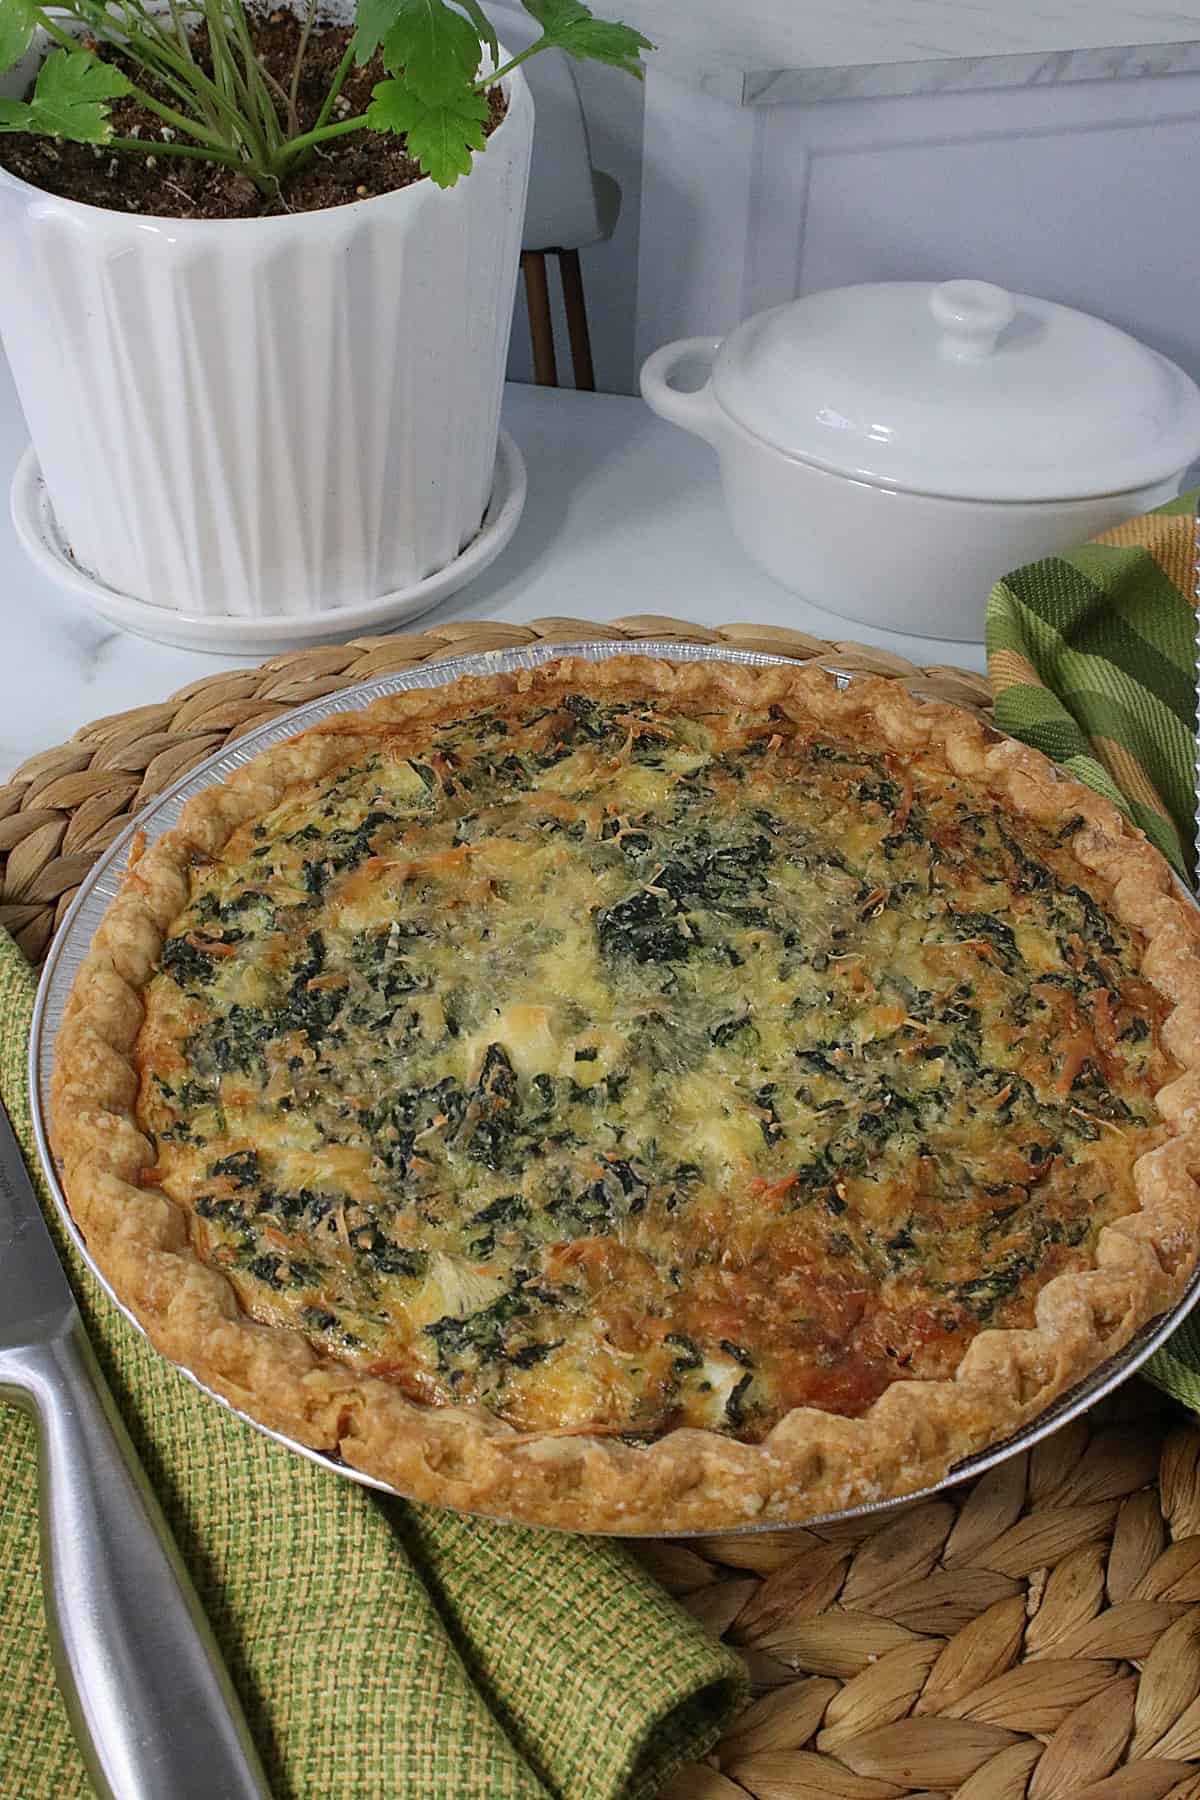 A golden brown baked Spinach and Artichoke Quiche in a pie pan.